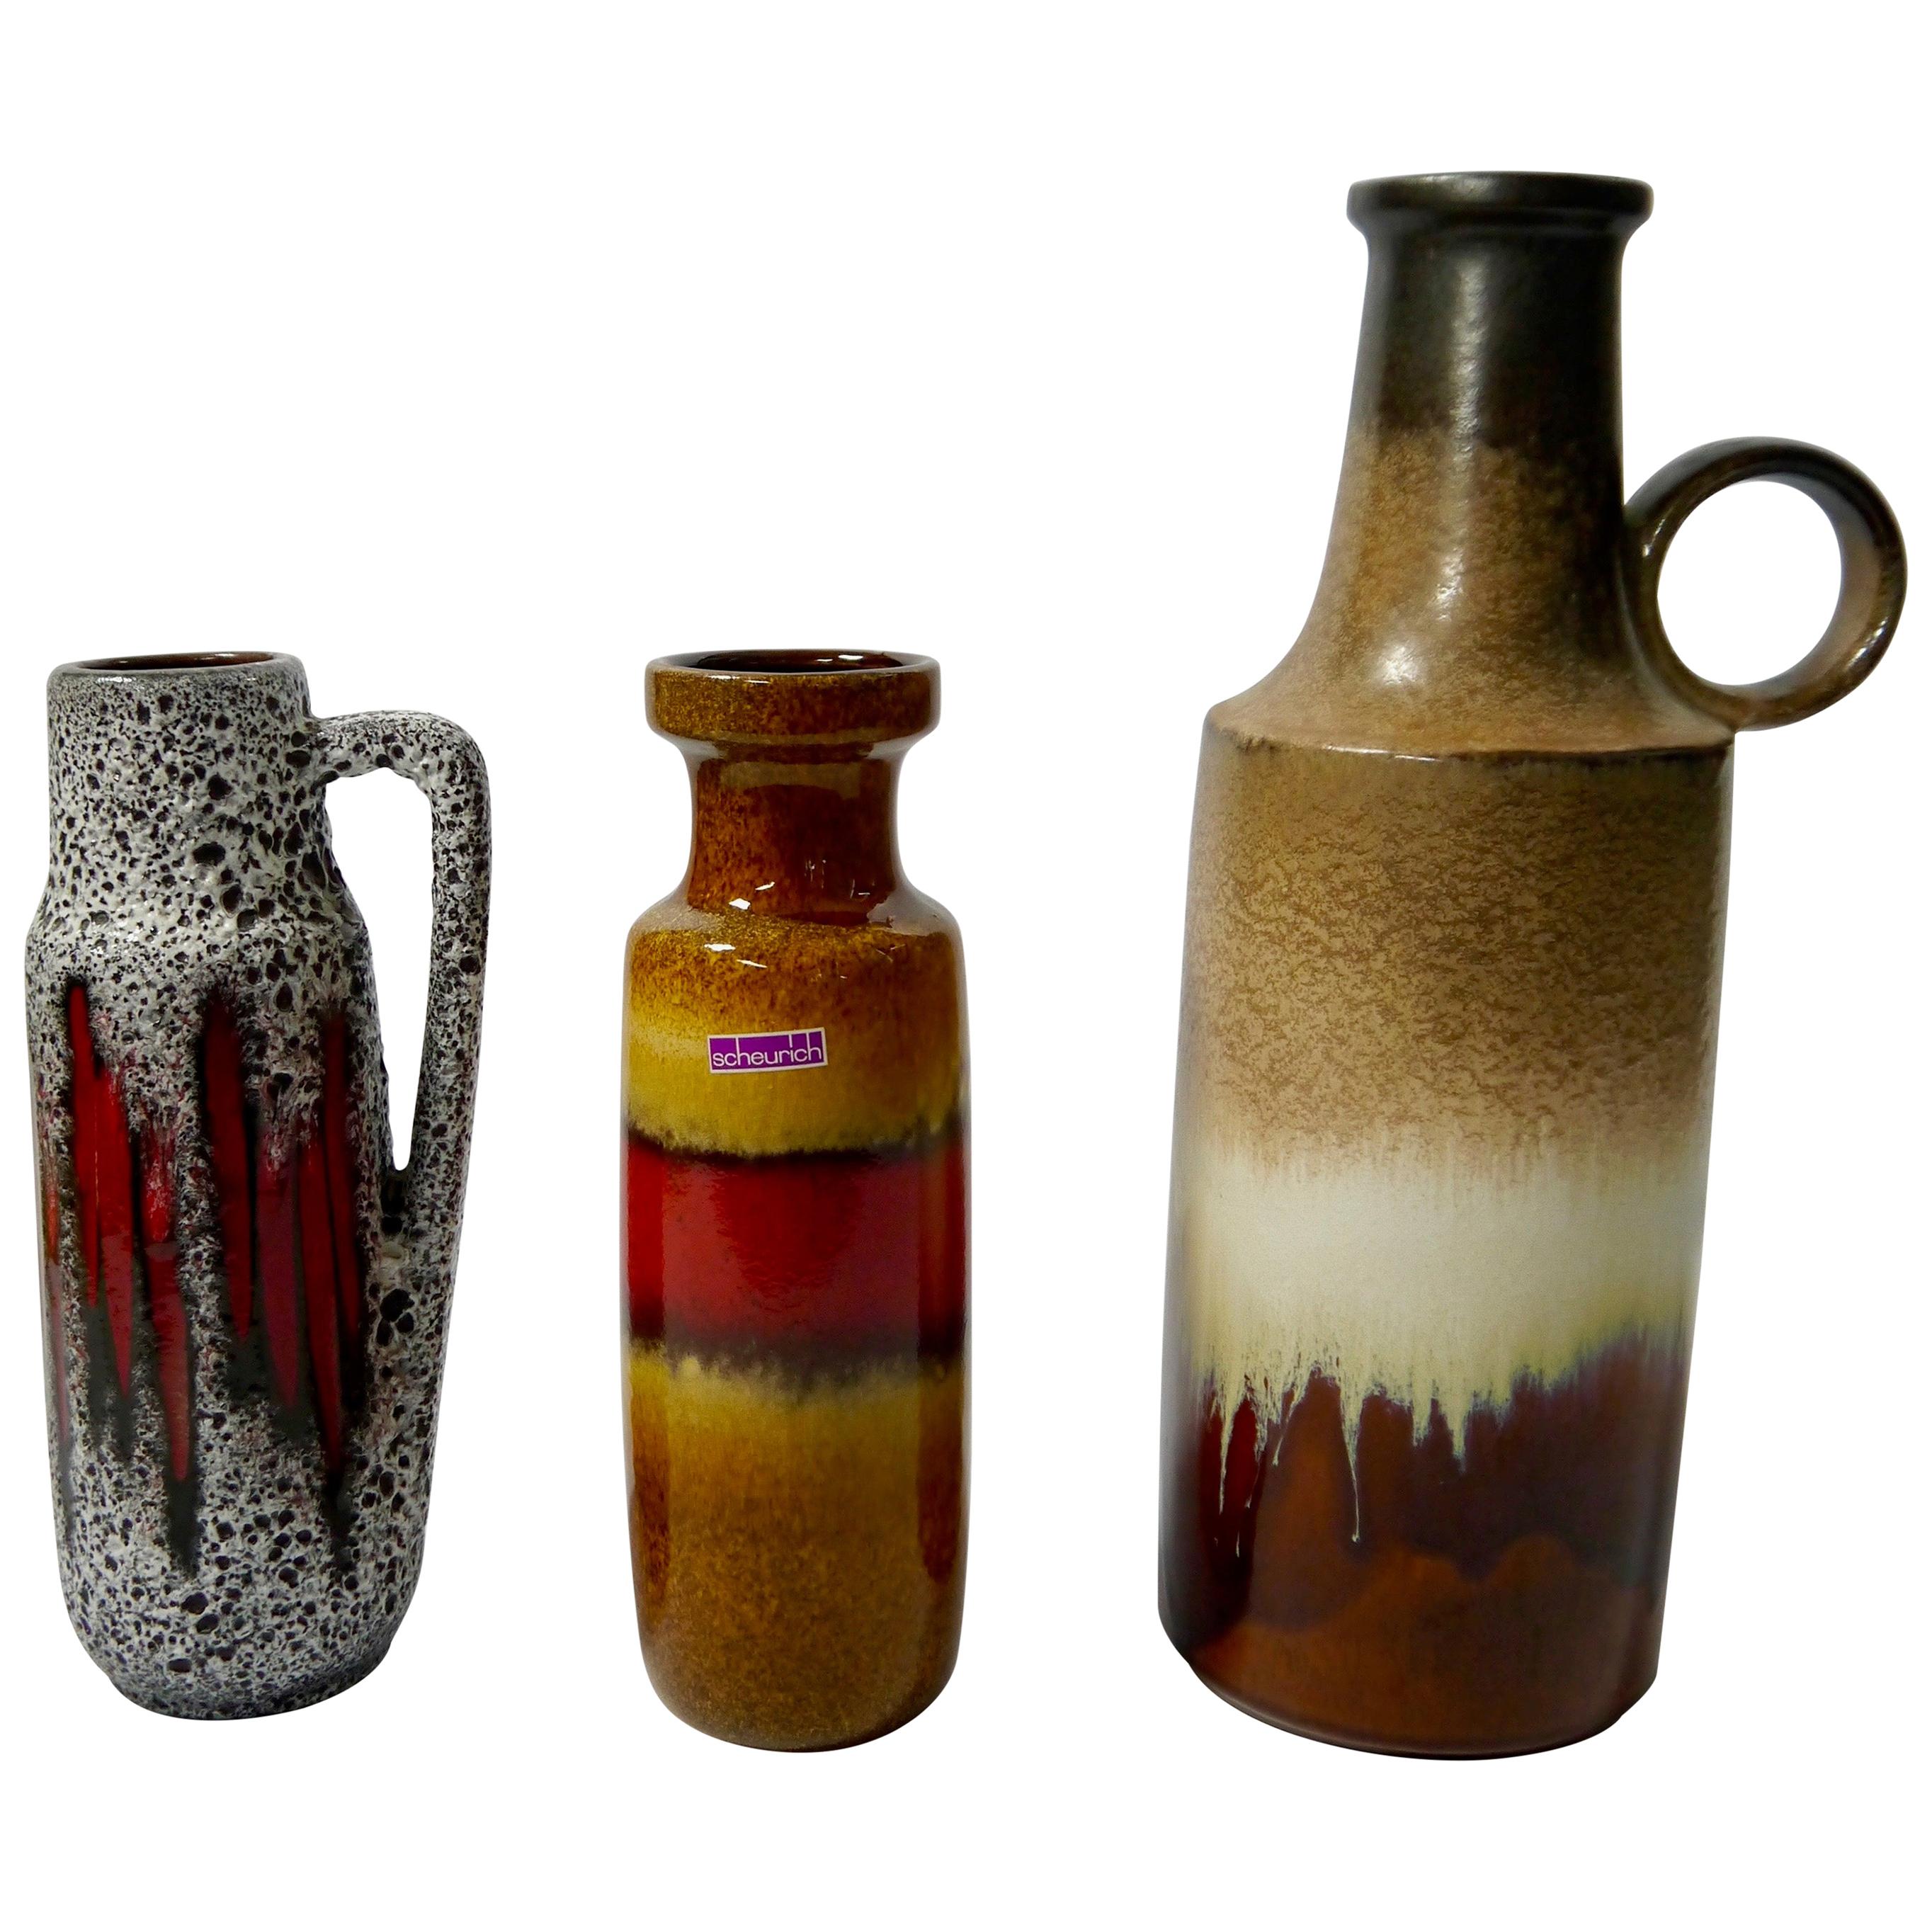 Fat Lava Vases - 313 For Sale on 1stDibs | fat lava pottery, fat 